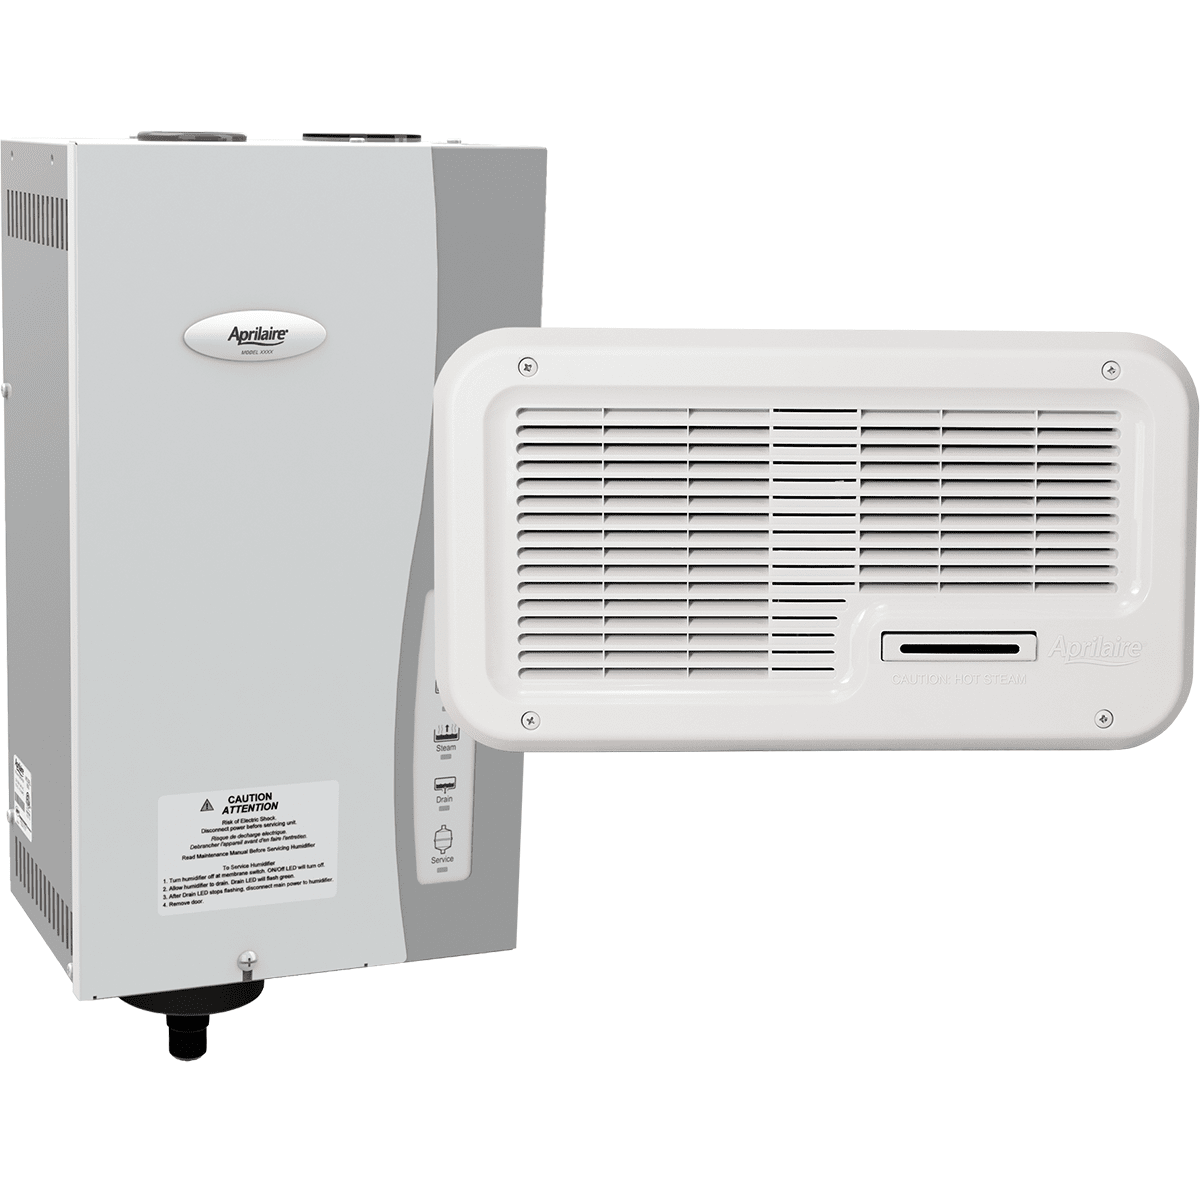 Aprilaire Modulating Steam Humidifier with Fan Pack (Model 866)